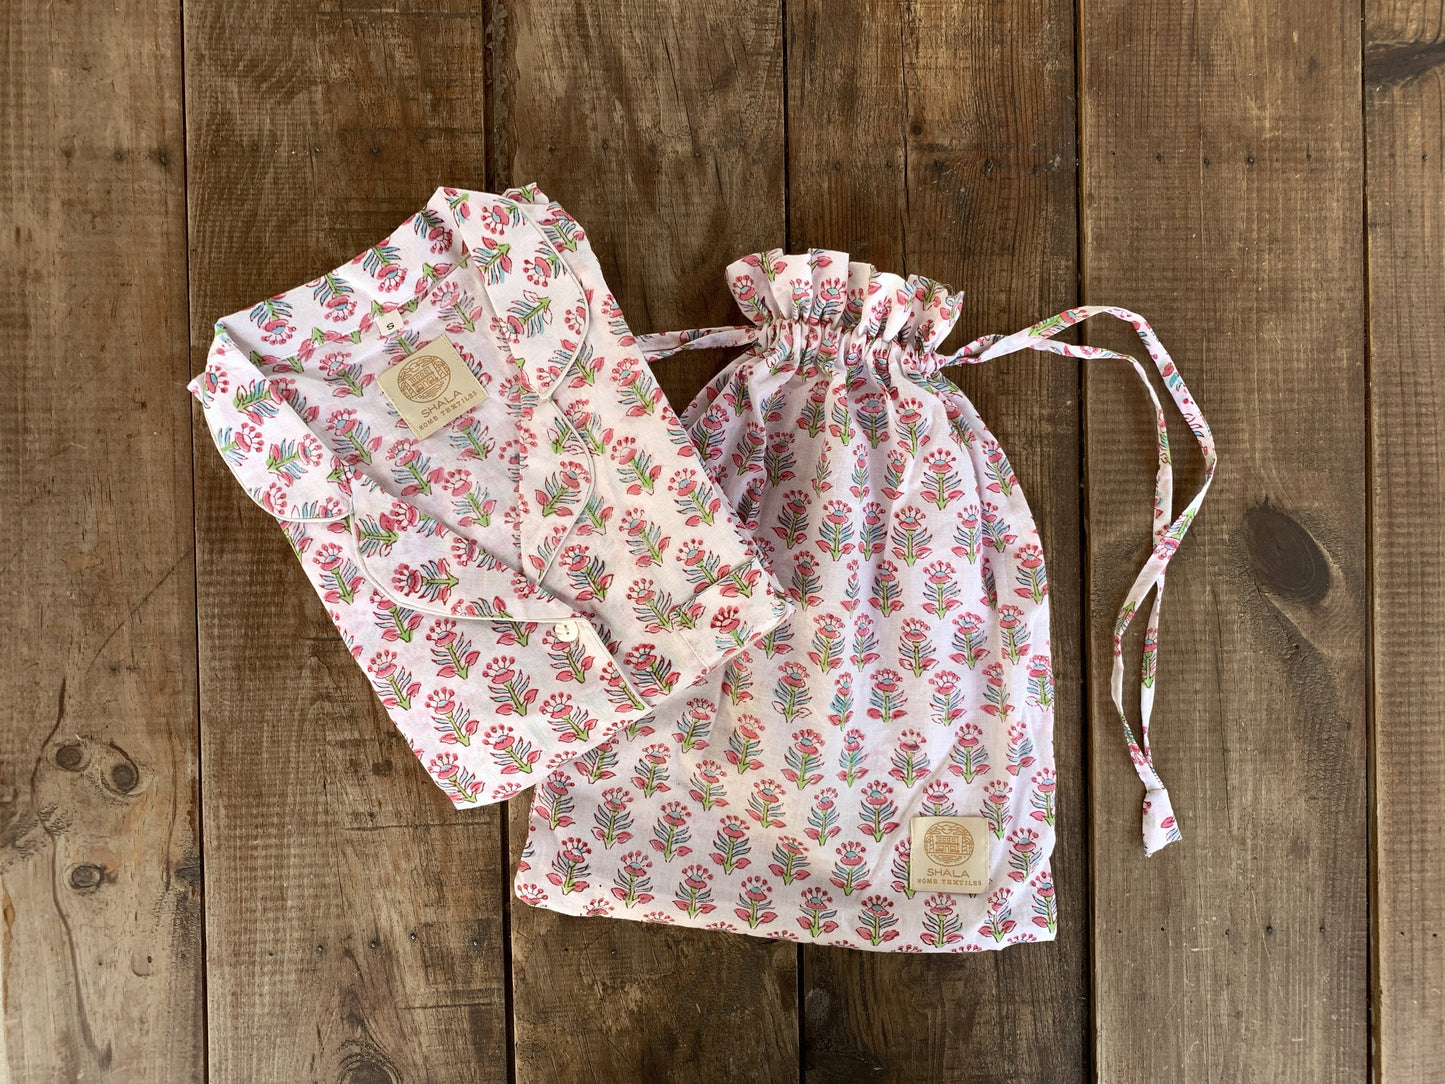 Gift SET Long-sleeved nightgown &amp; matching slippers Pure cotton block print handmade in India White pink flowers